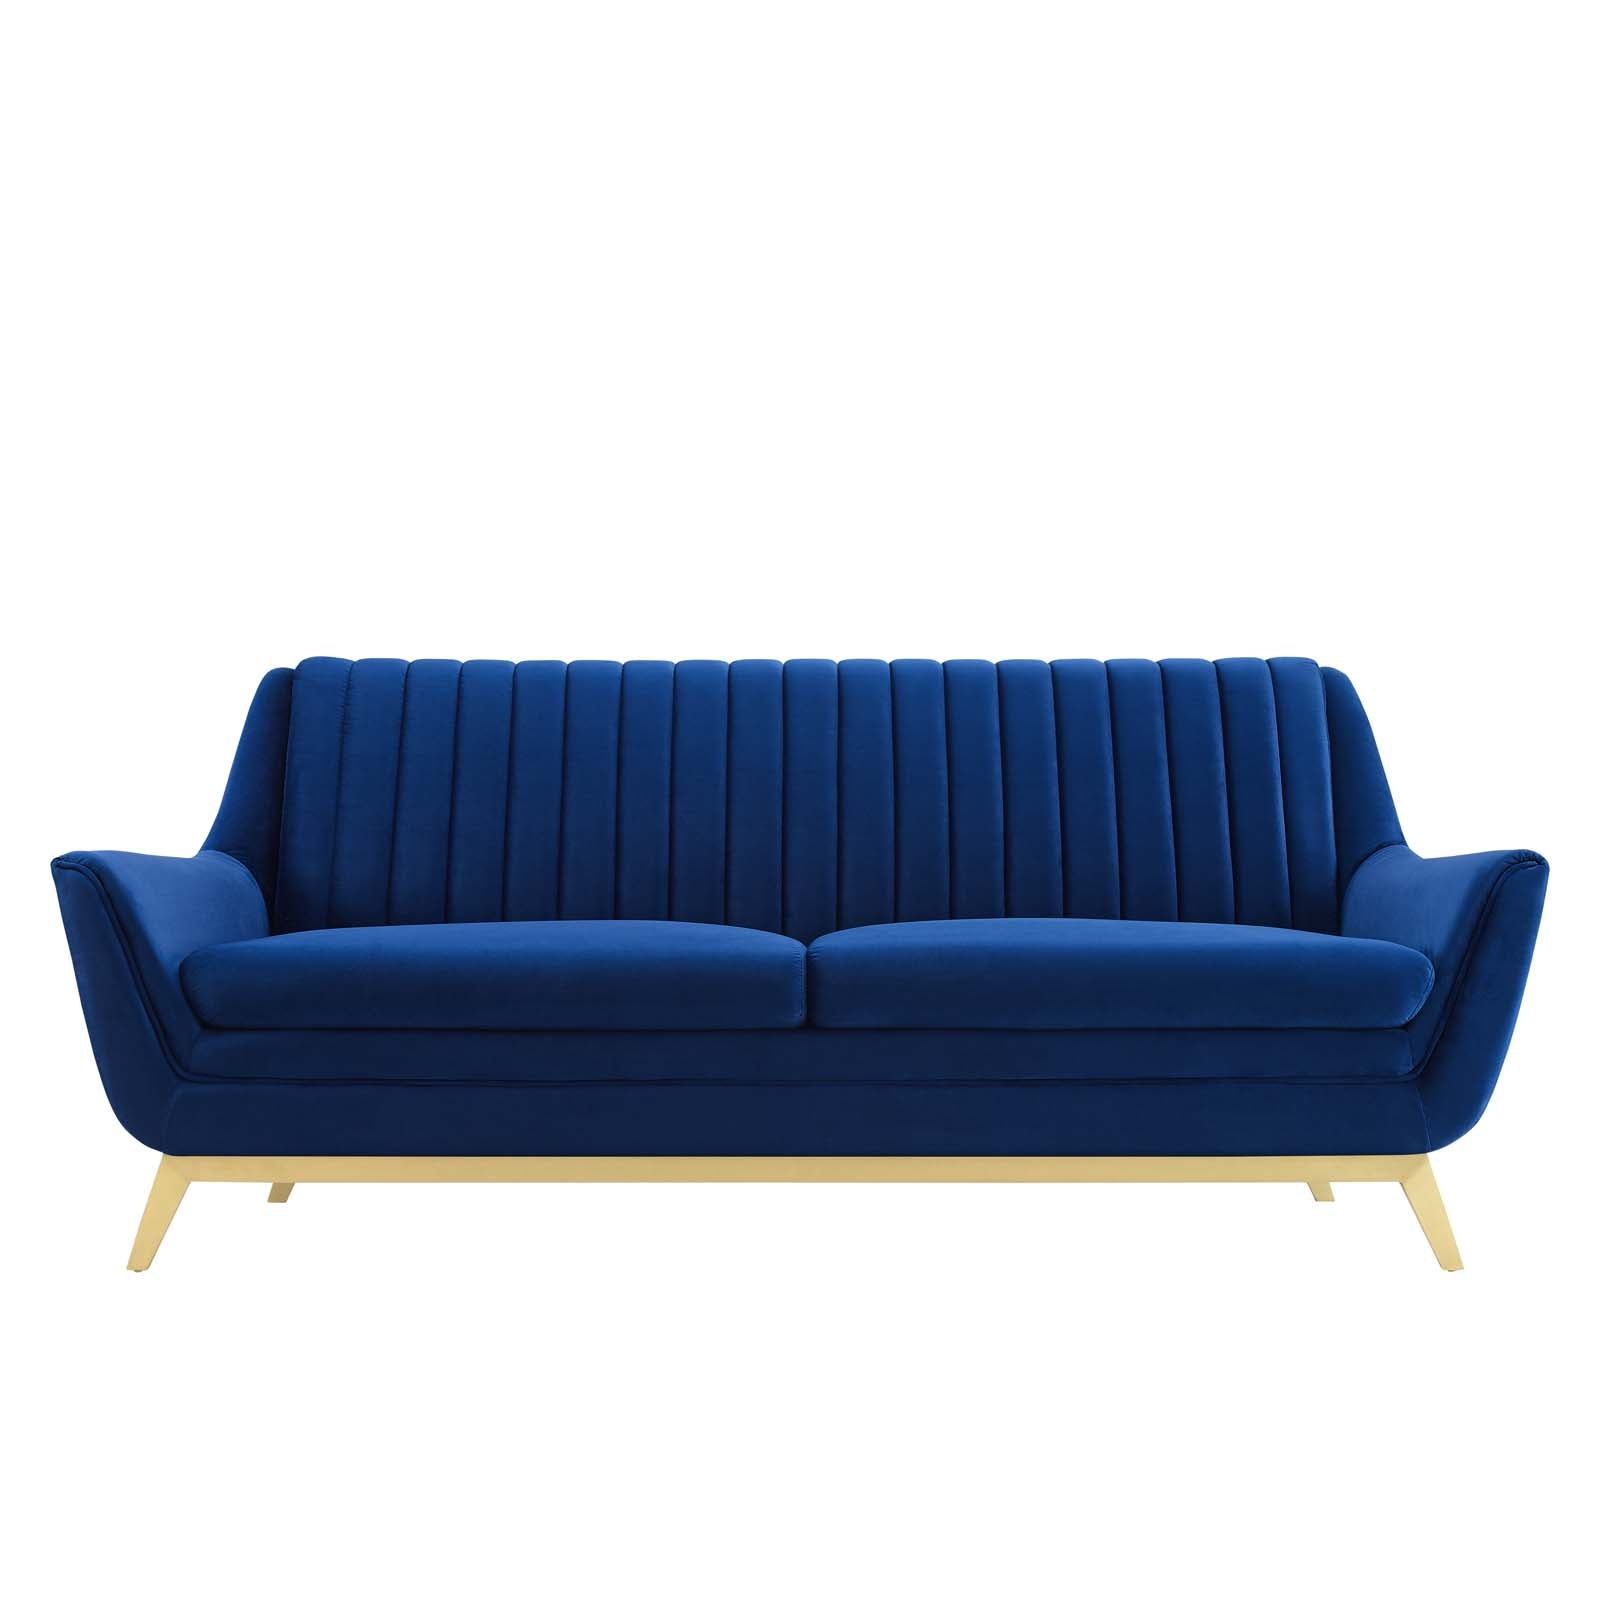 Modway Sofas & Couches - Winsome Channel Tufted Performance Velvet Sofa Navy